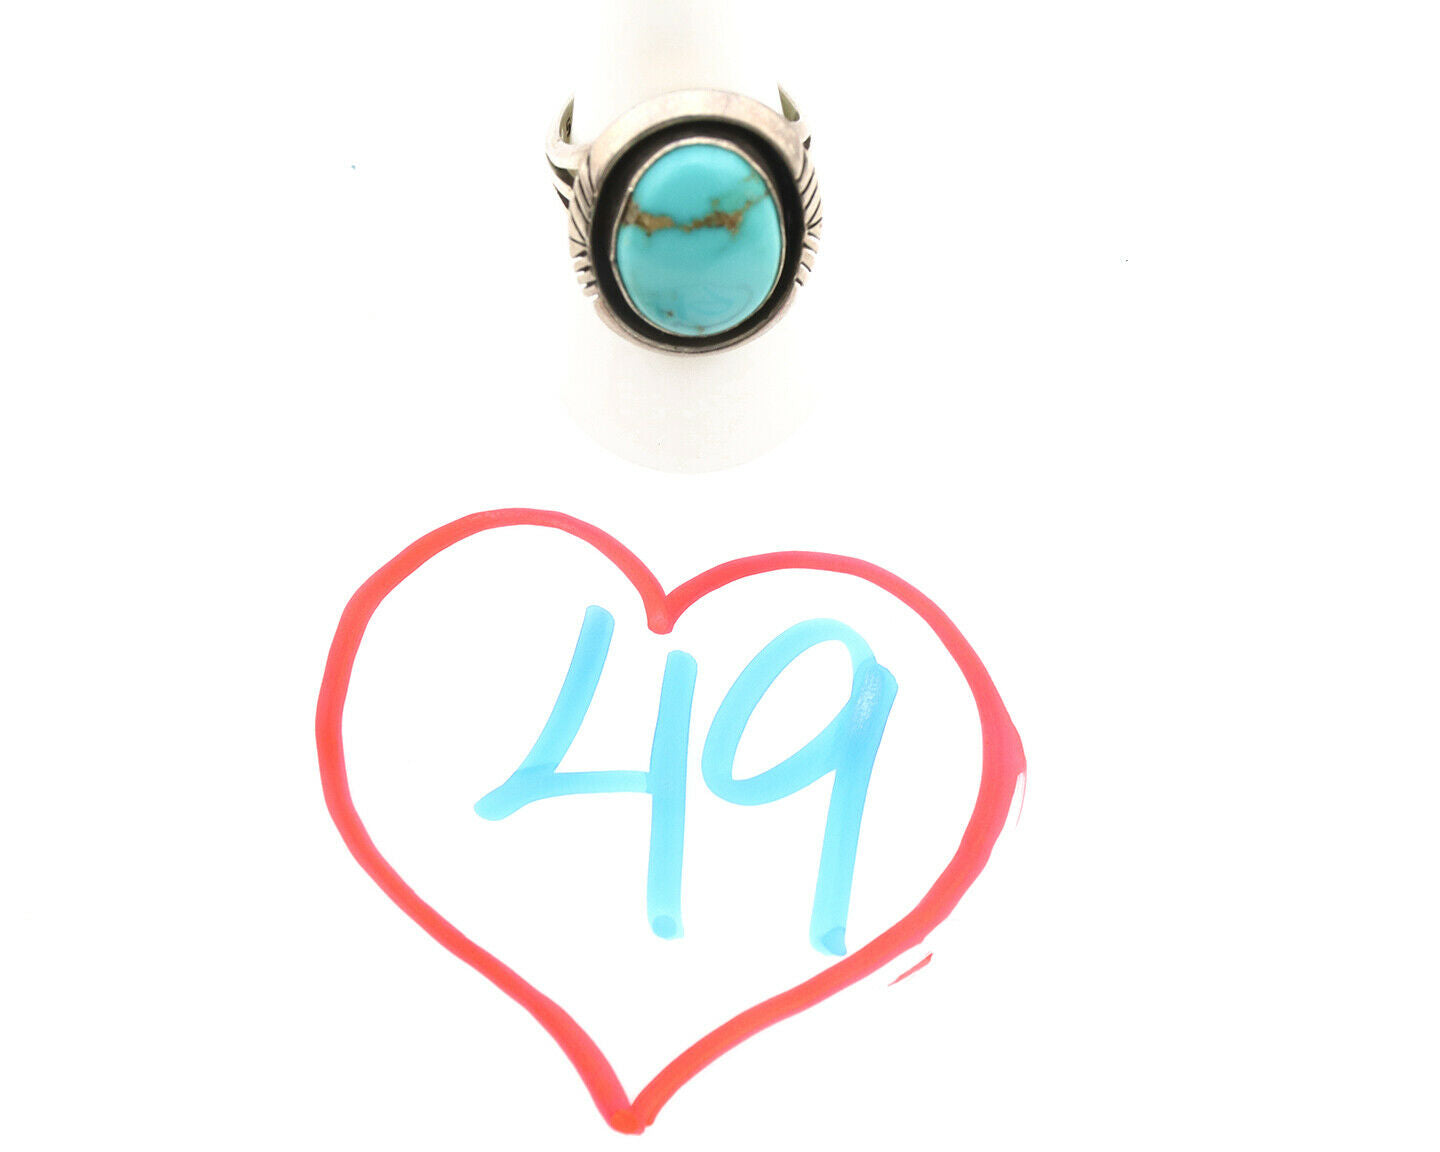 Navajo Ring .925 Silver Natural Blue Turquoise Signed Artist C.1980's